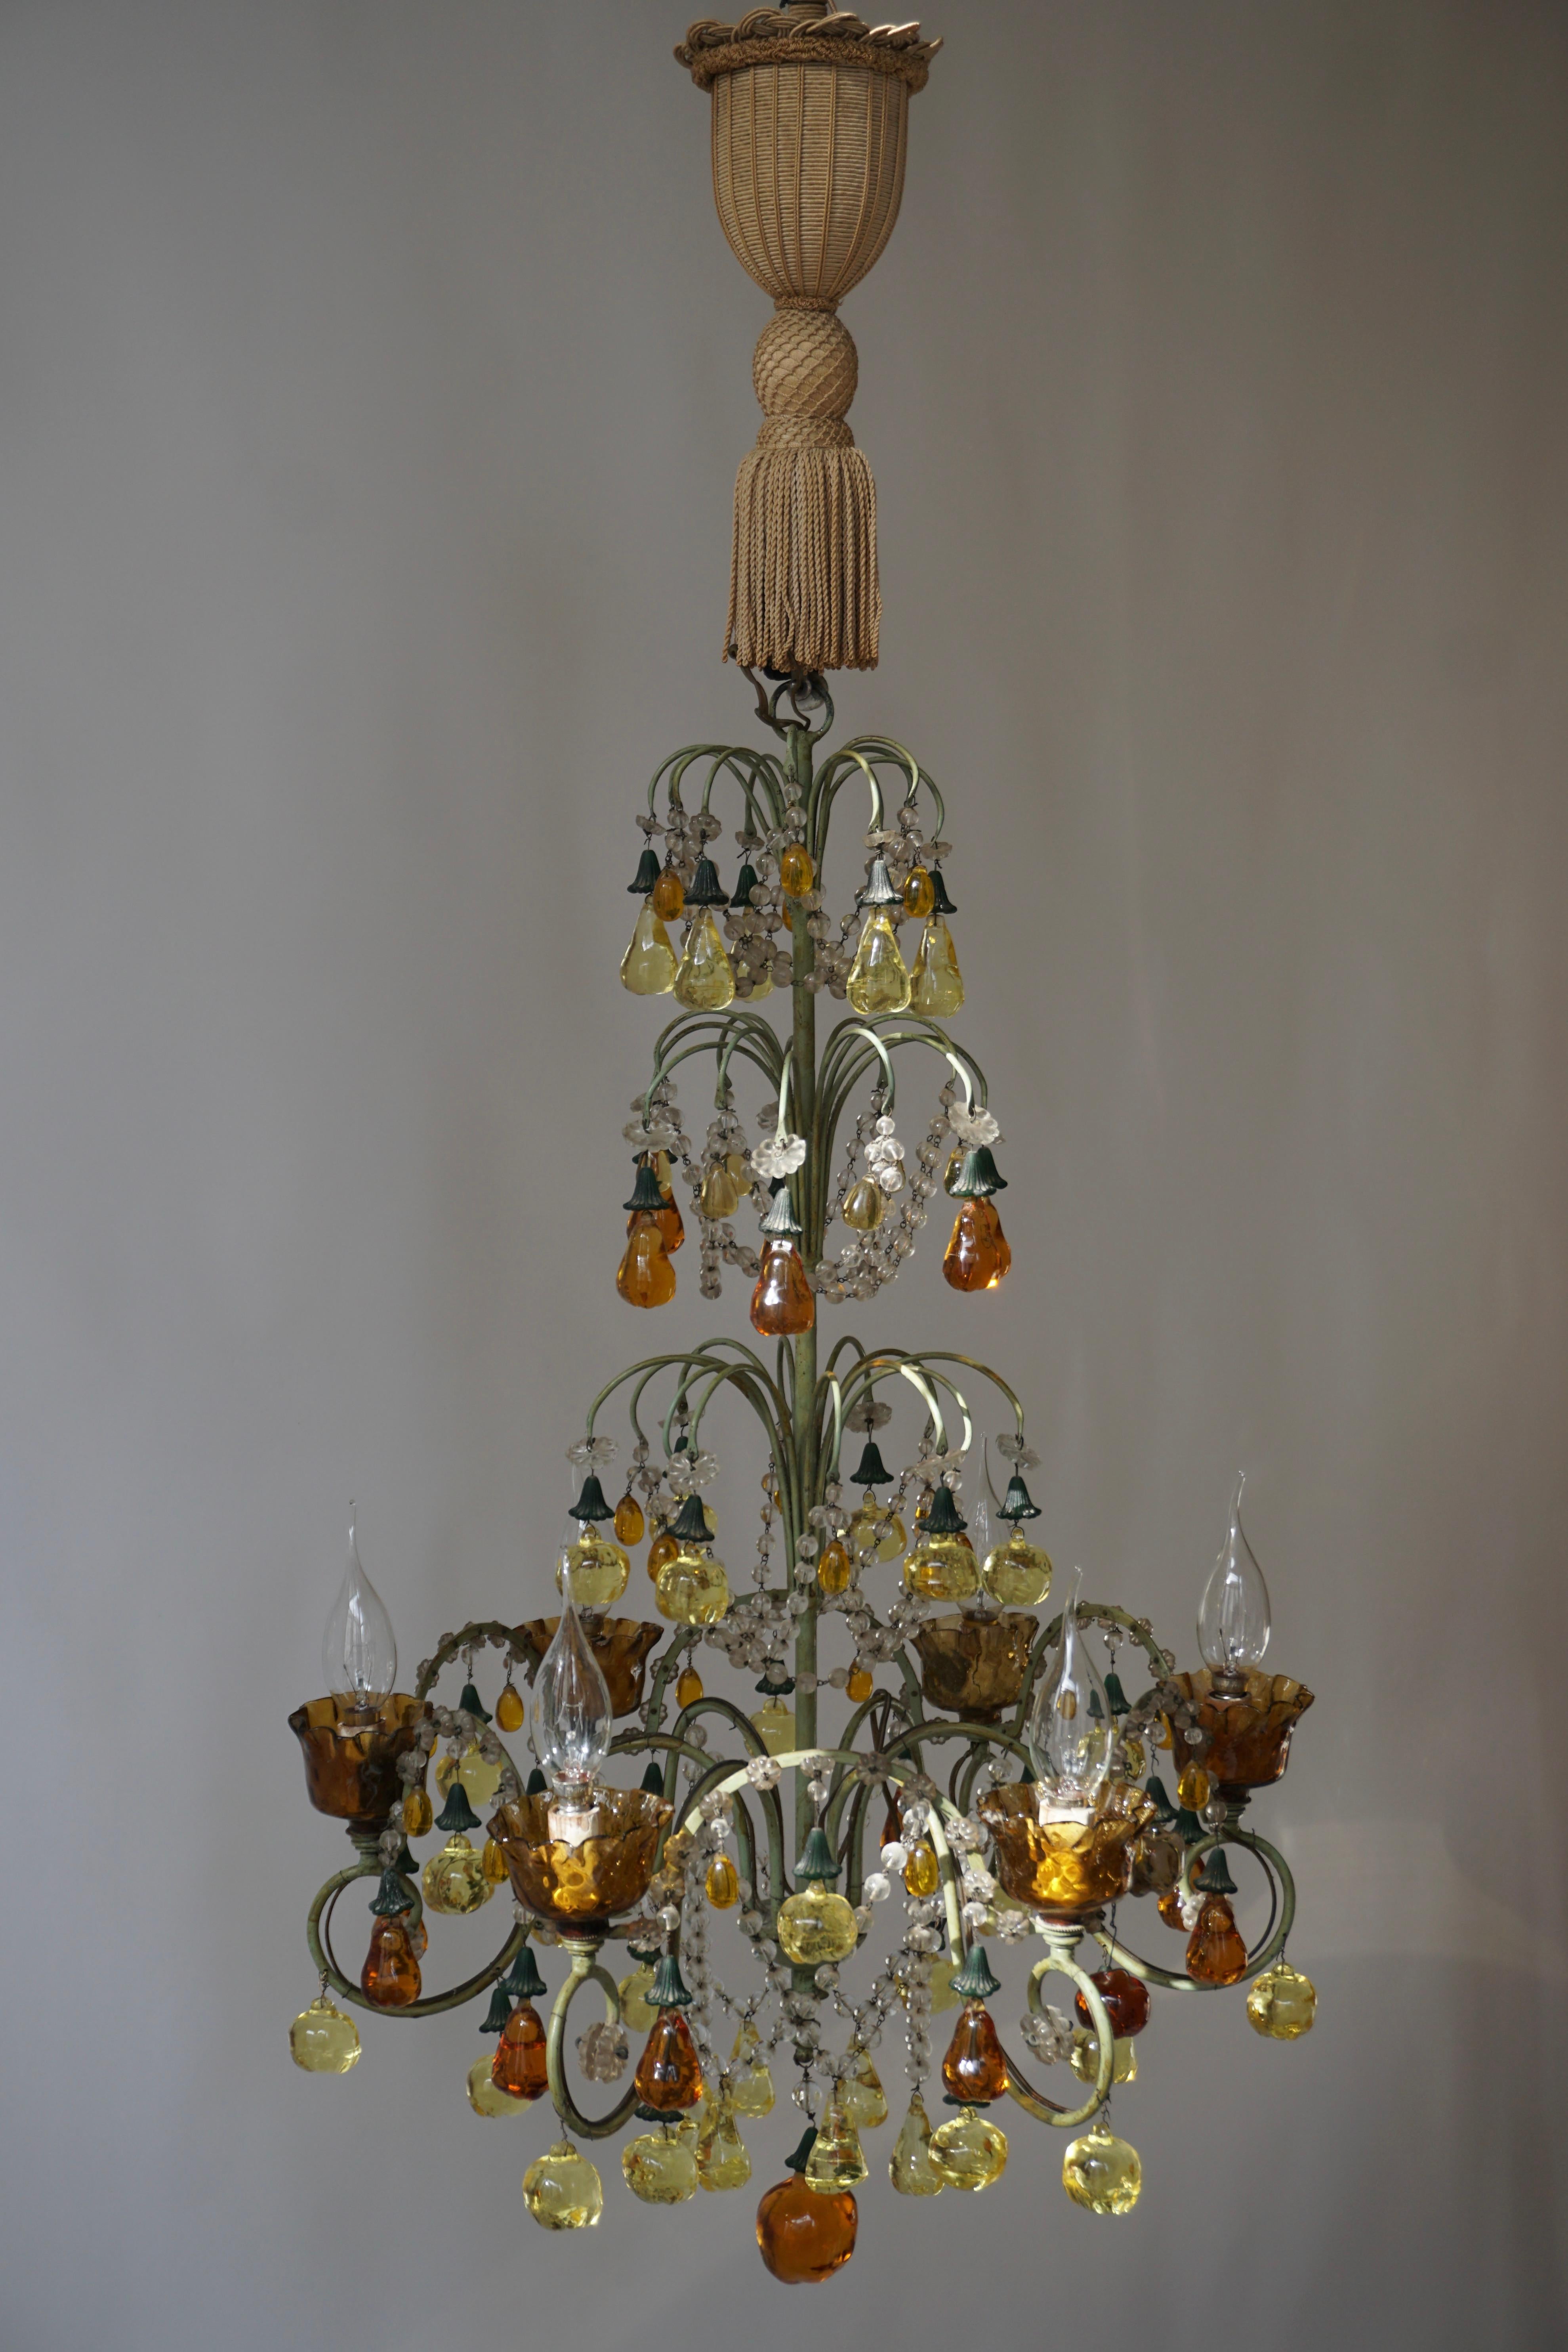 Fabulous, Italian 1950s green painted iron chandelier with Murano glass fruit decorations.
The chandelier consists of a gracefully scrolled green-iron frame with an assortment of glass fruits, pears and apples. 

The light requires six single E14